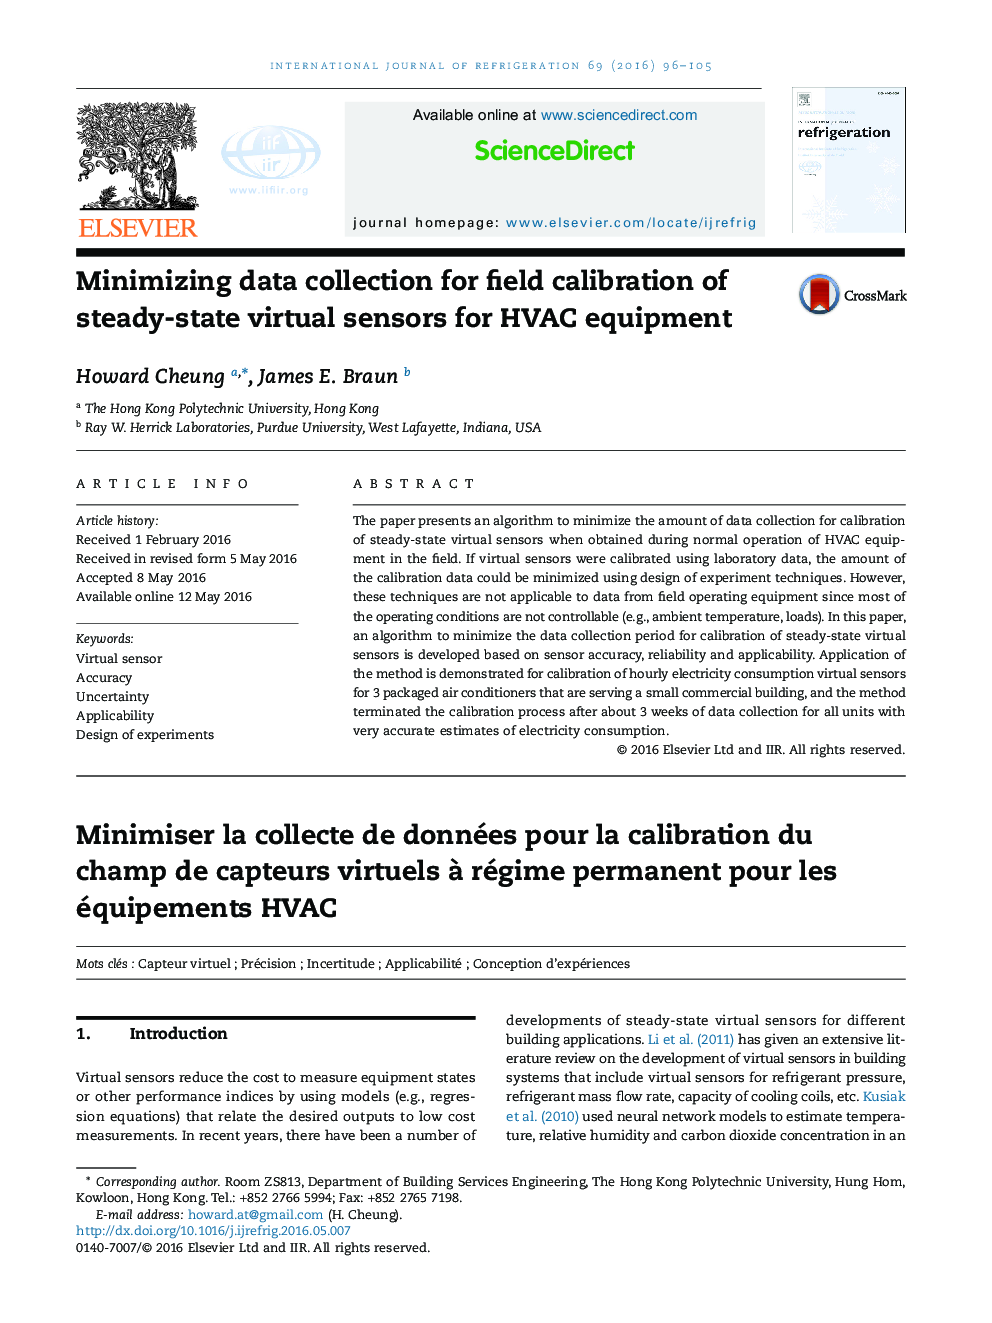 Minimizing data collection for field calibration of steady-state virtual sensors for HVAC equipment